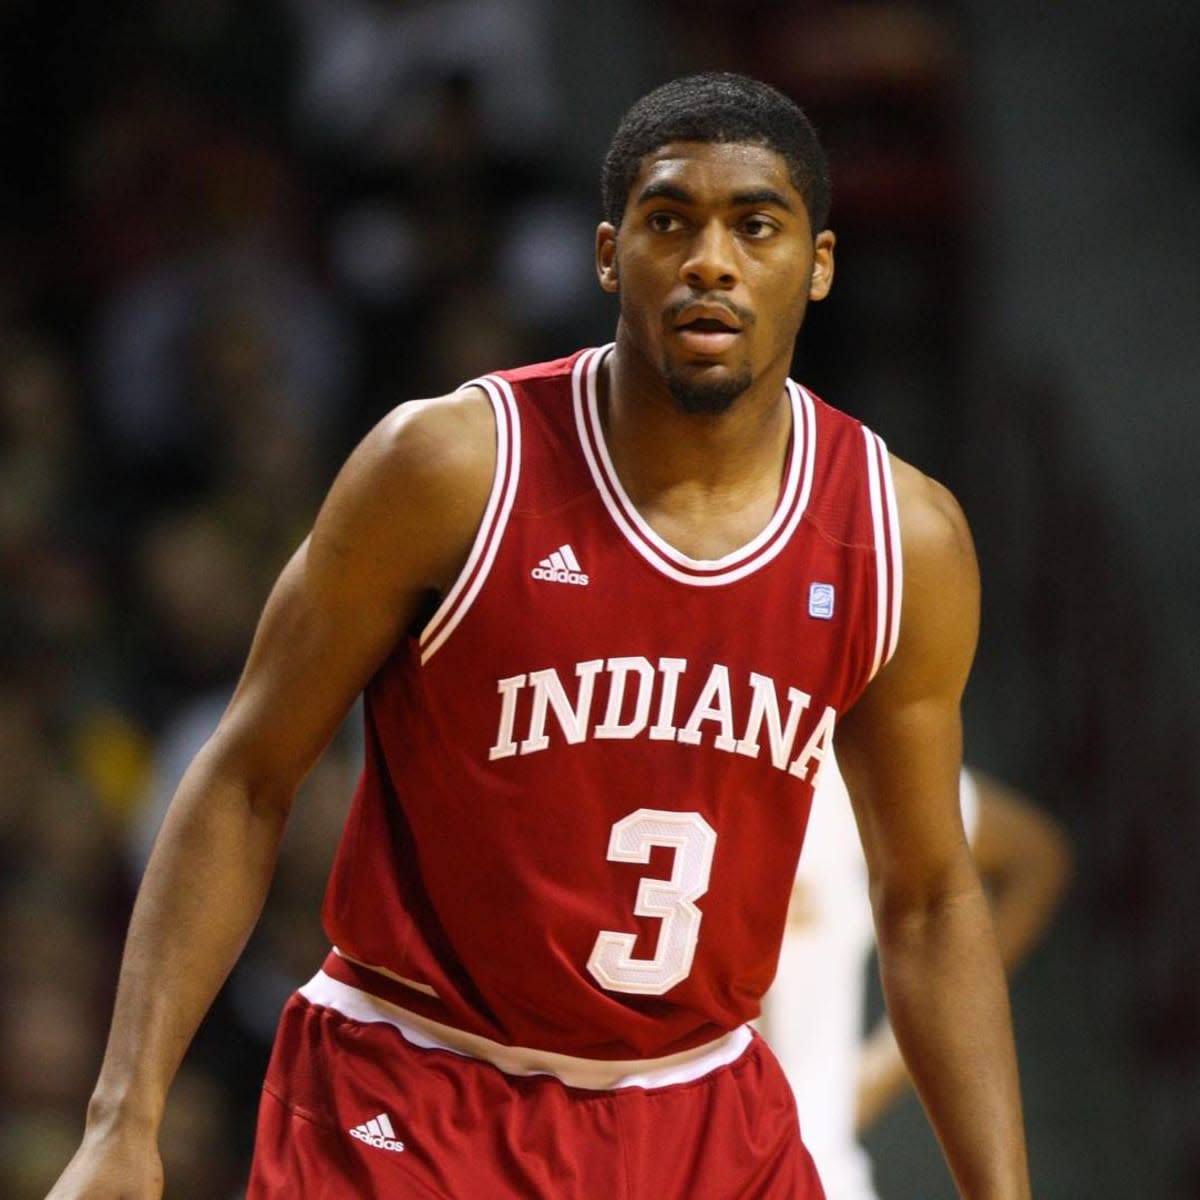 Indiana basketball: What numbers are the new players wearing